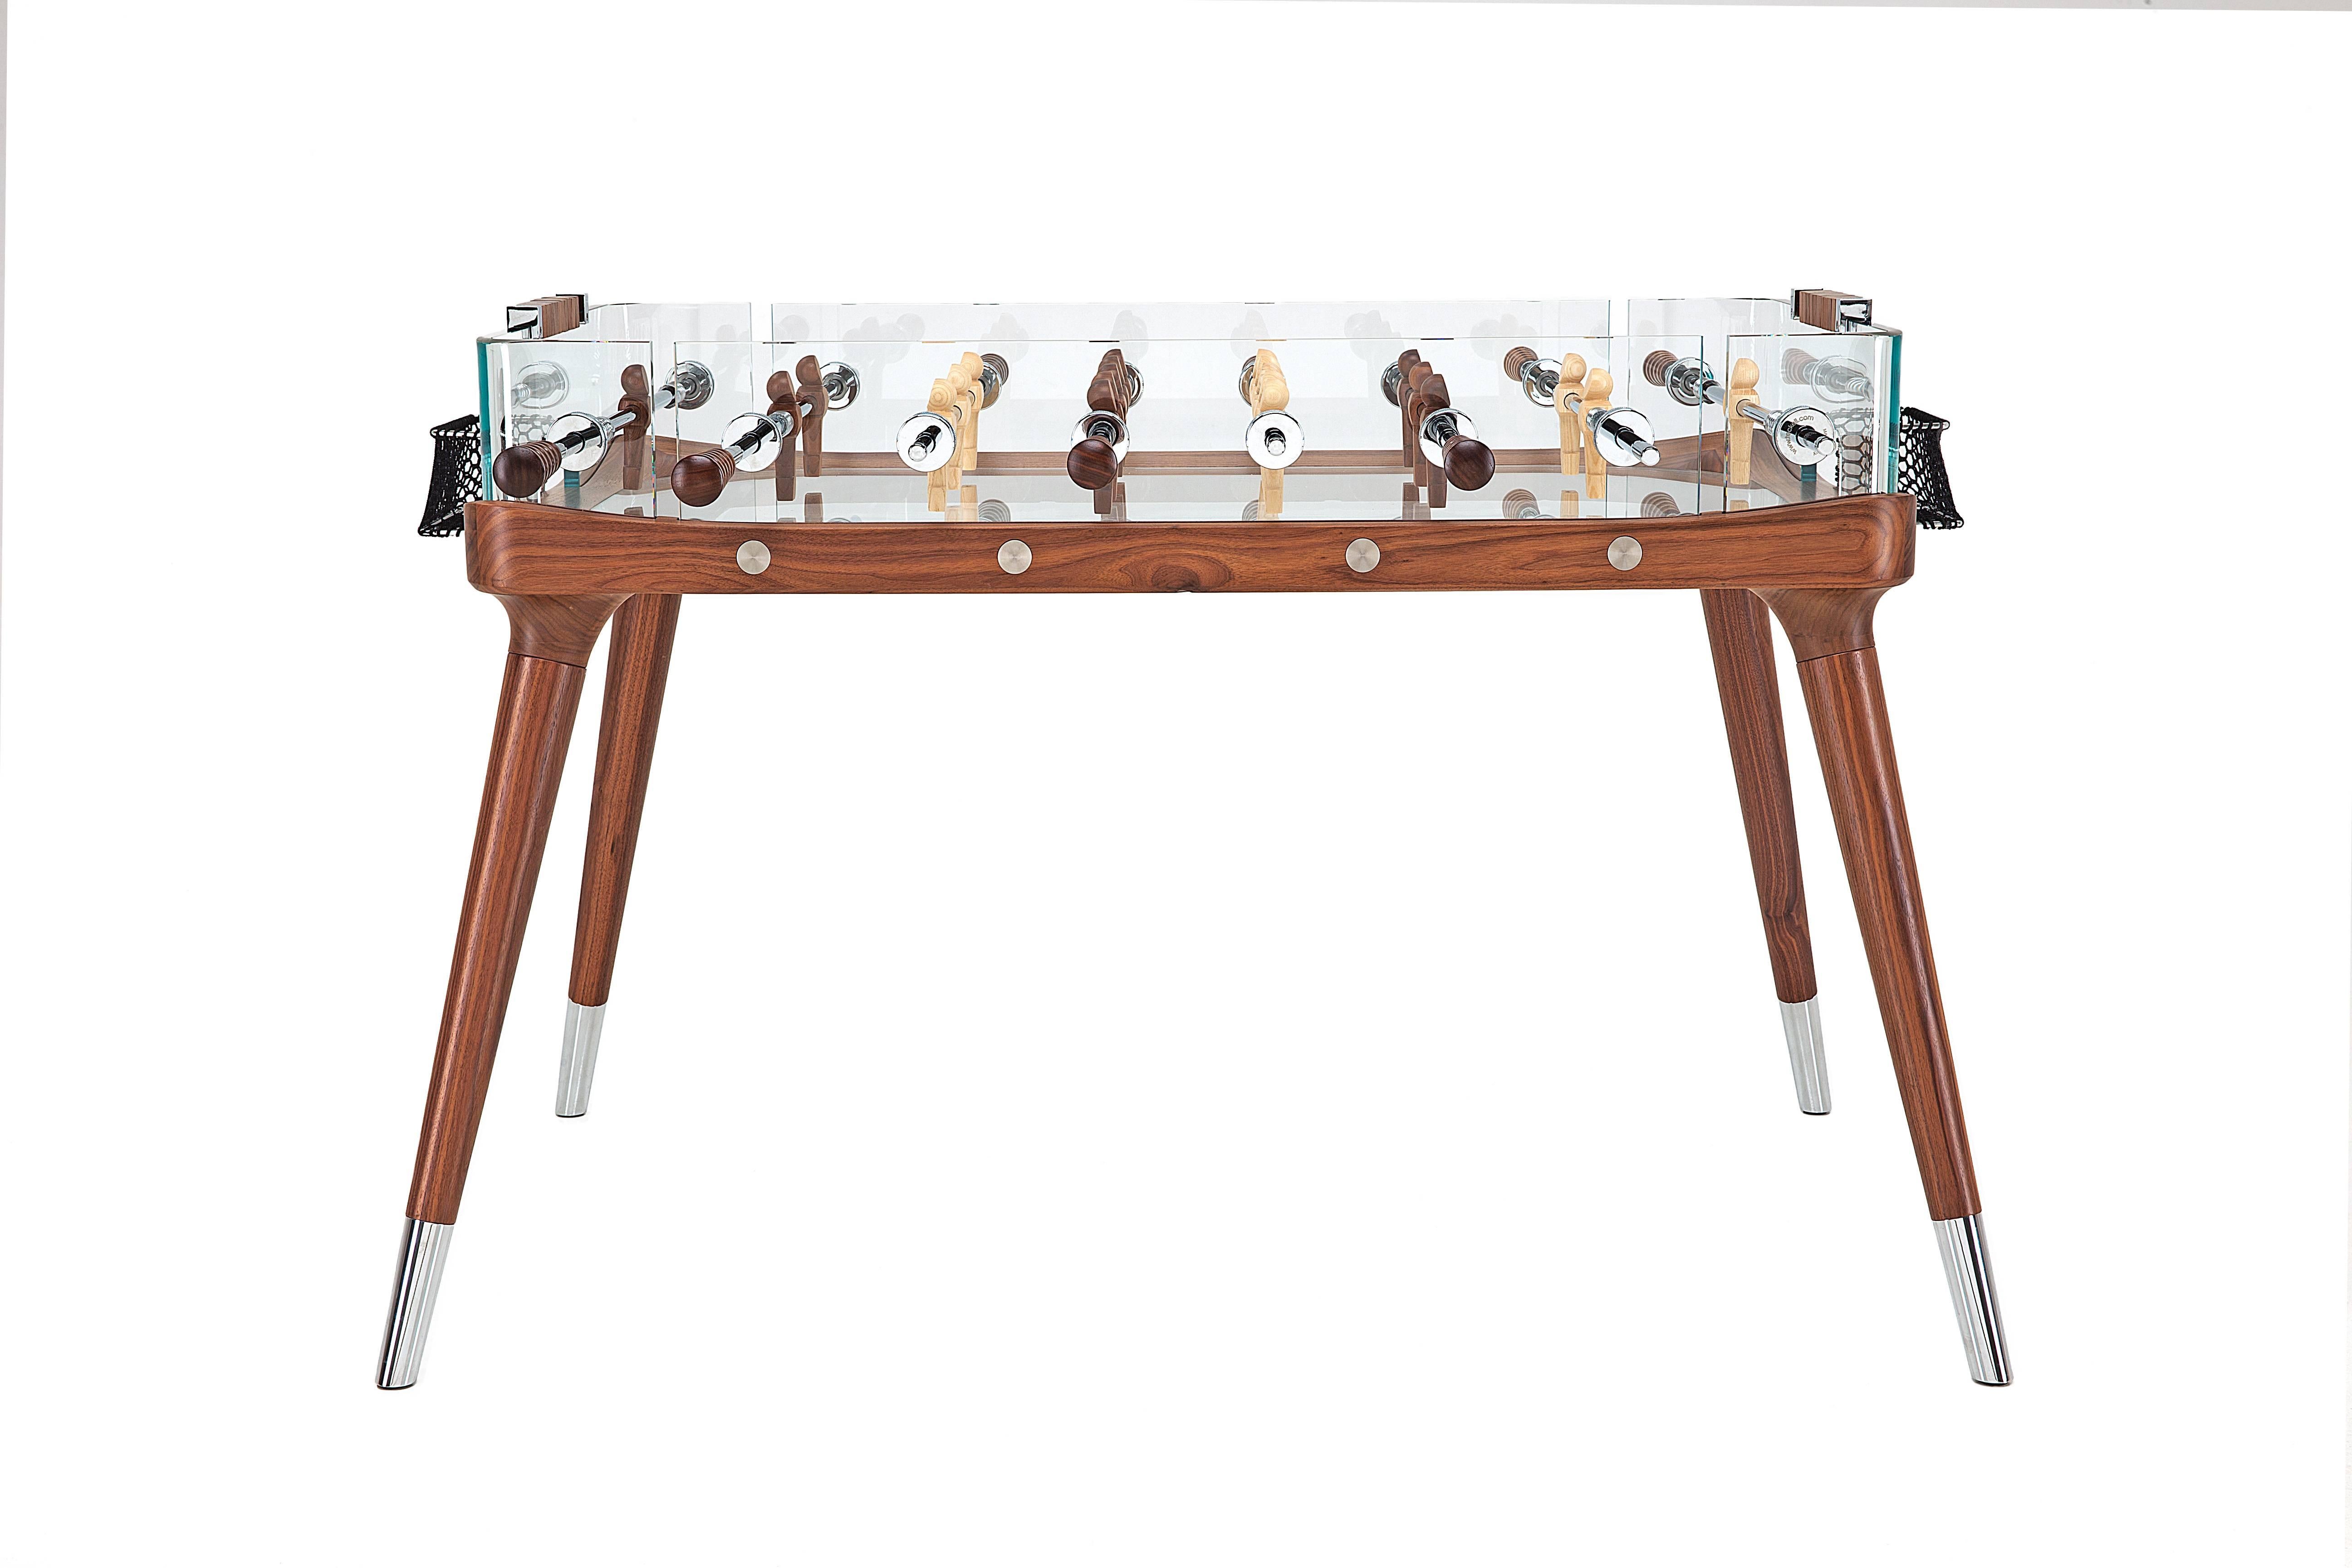 A subtle and elegant walnut structure highlights and supports this modern and
essential foosball table, inviting the challenge of enjoying the game until its very last minute (90° Minuto). Engineering and technology is cleverly concealed beneath the